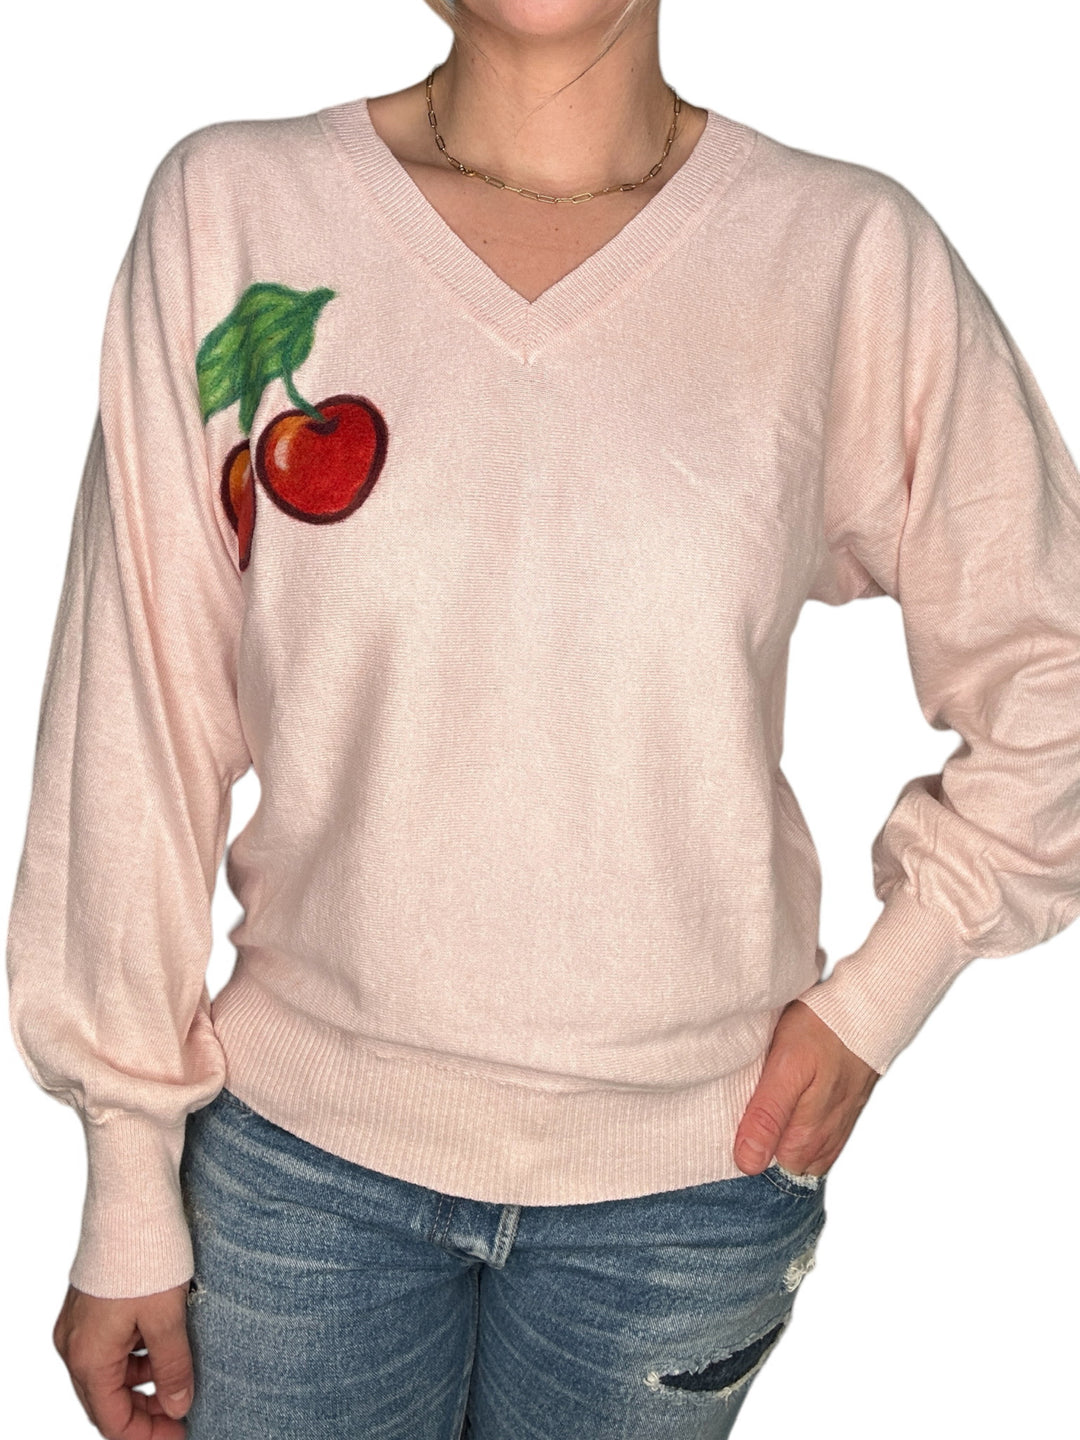 COTTON CASHMERE CHERRIES V-NECK SWEATER-PINK - Kingfisher Road - Online Boutique